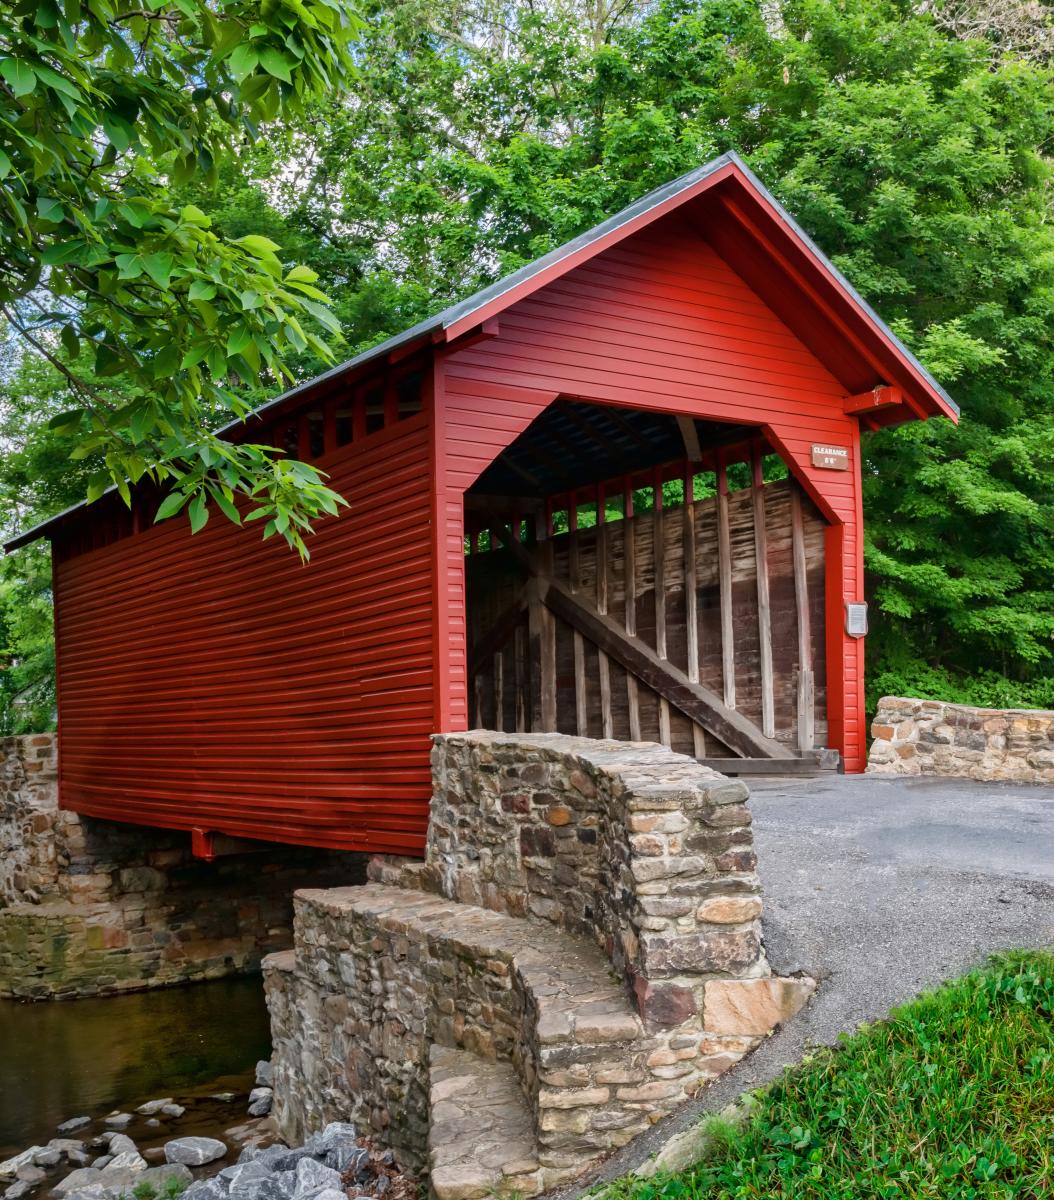 Roddy Road Covered Bridge in Thurmont, MD